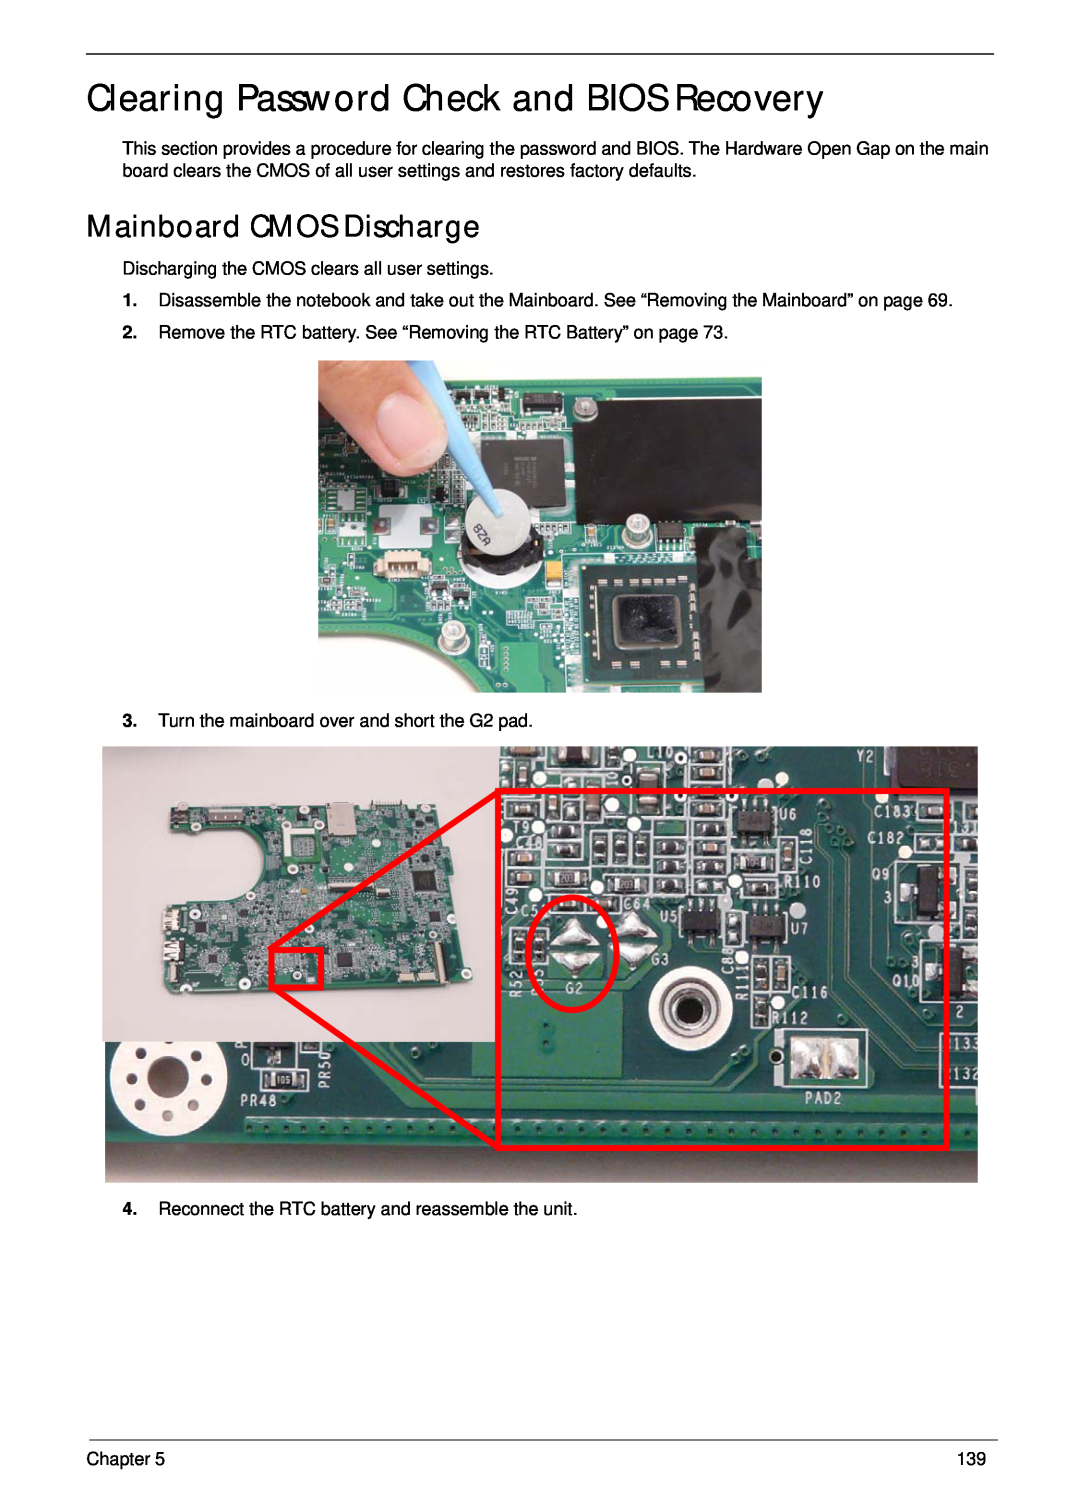 Gateway EC14 manual Clearing Password Check and BIOS Recovery, Mainboard CMOS Discharge 